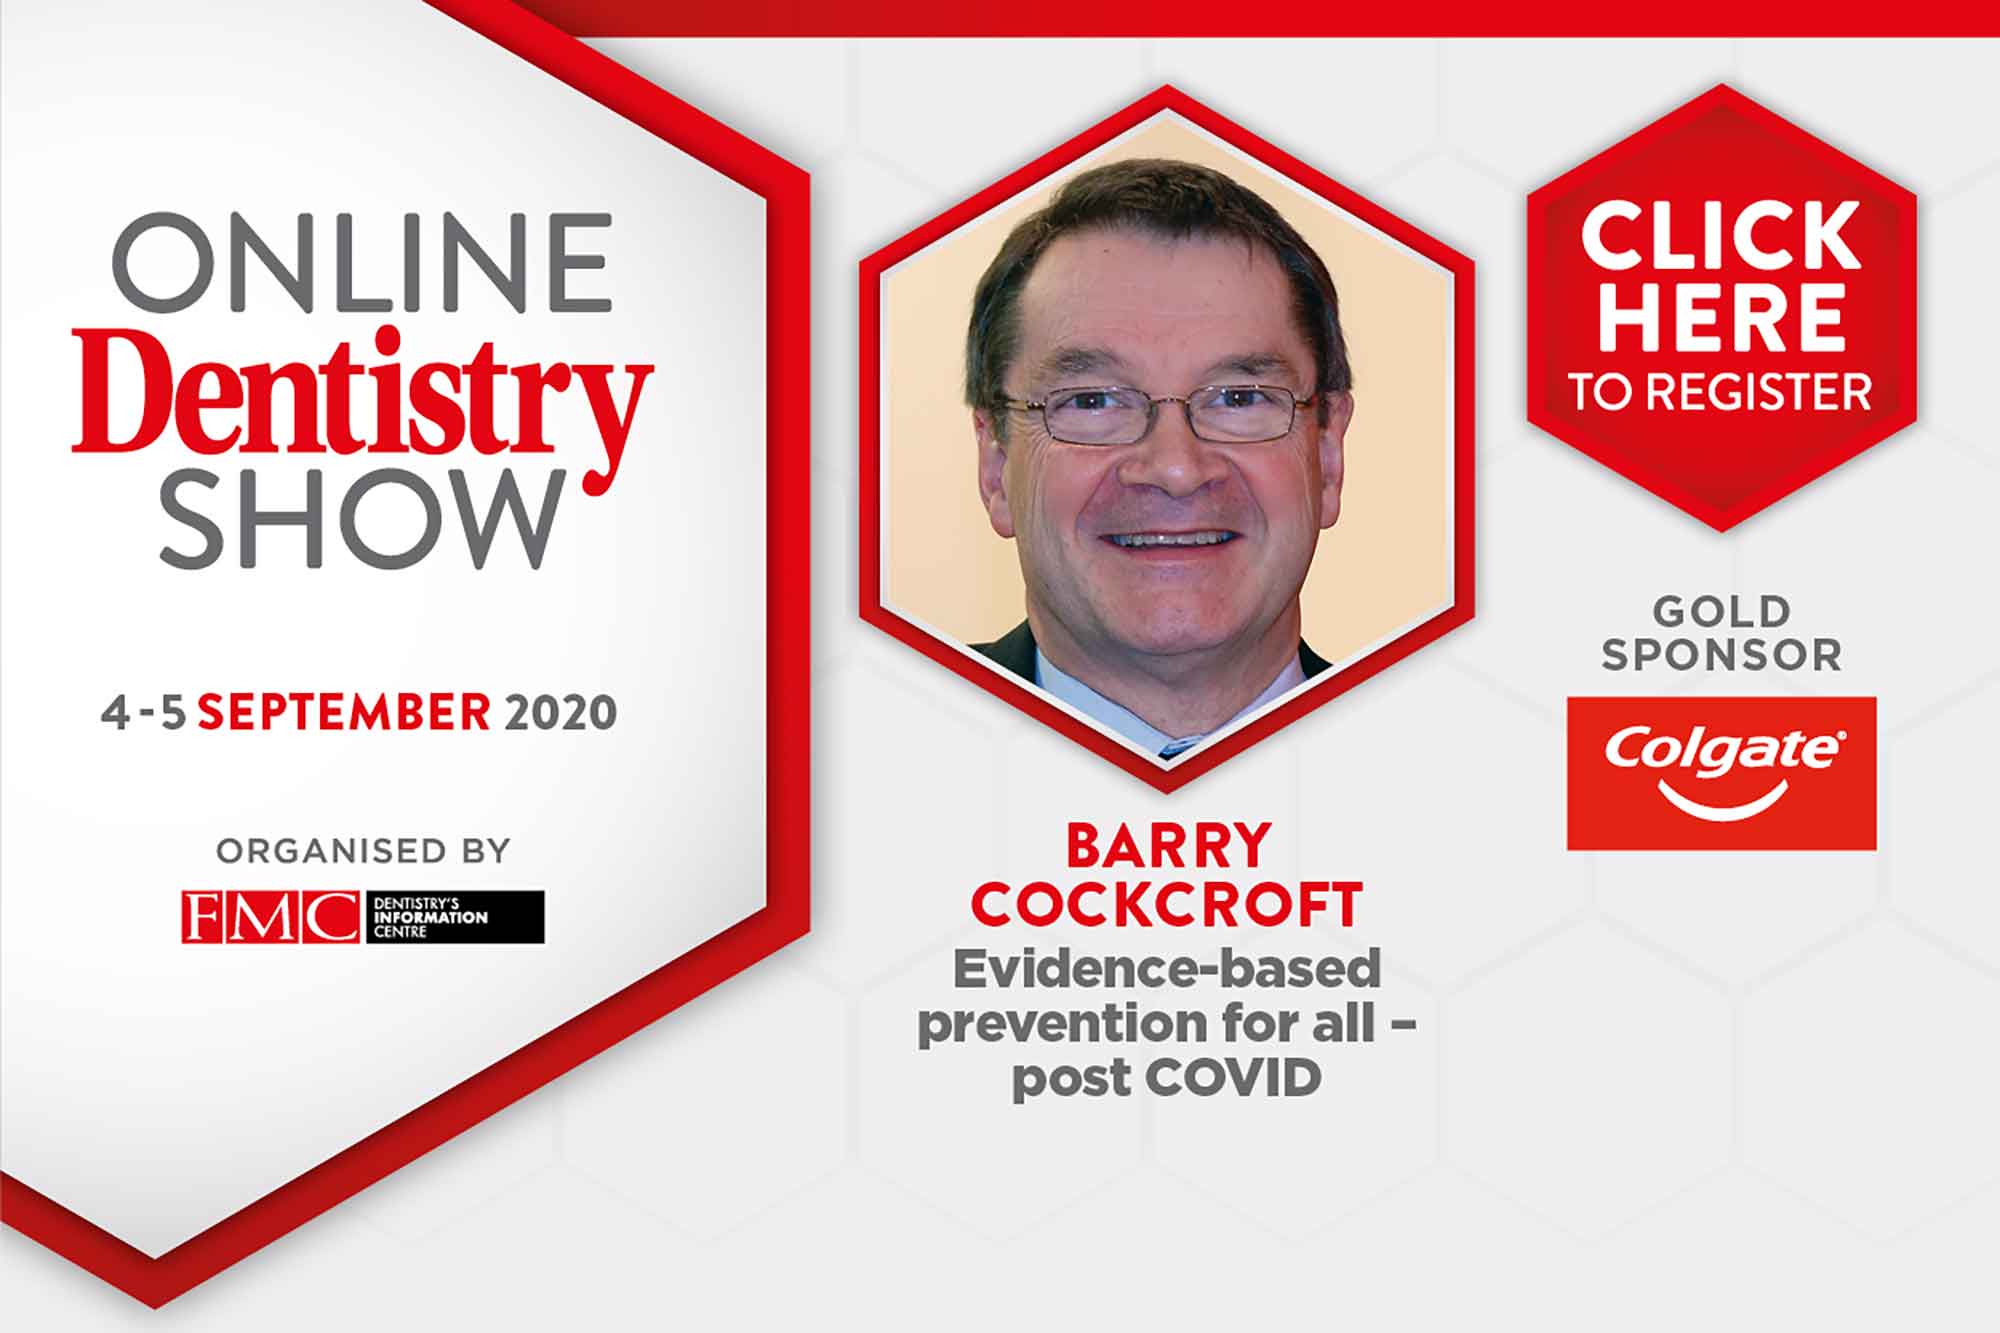 Barry Cockcroft will talk at the Online Dentistry Show